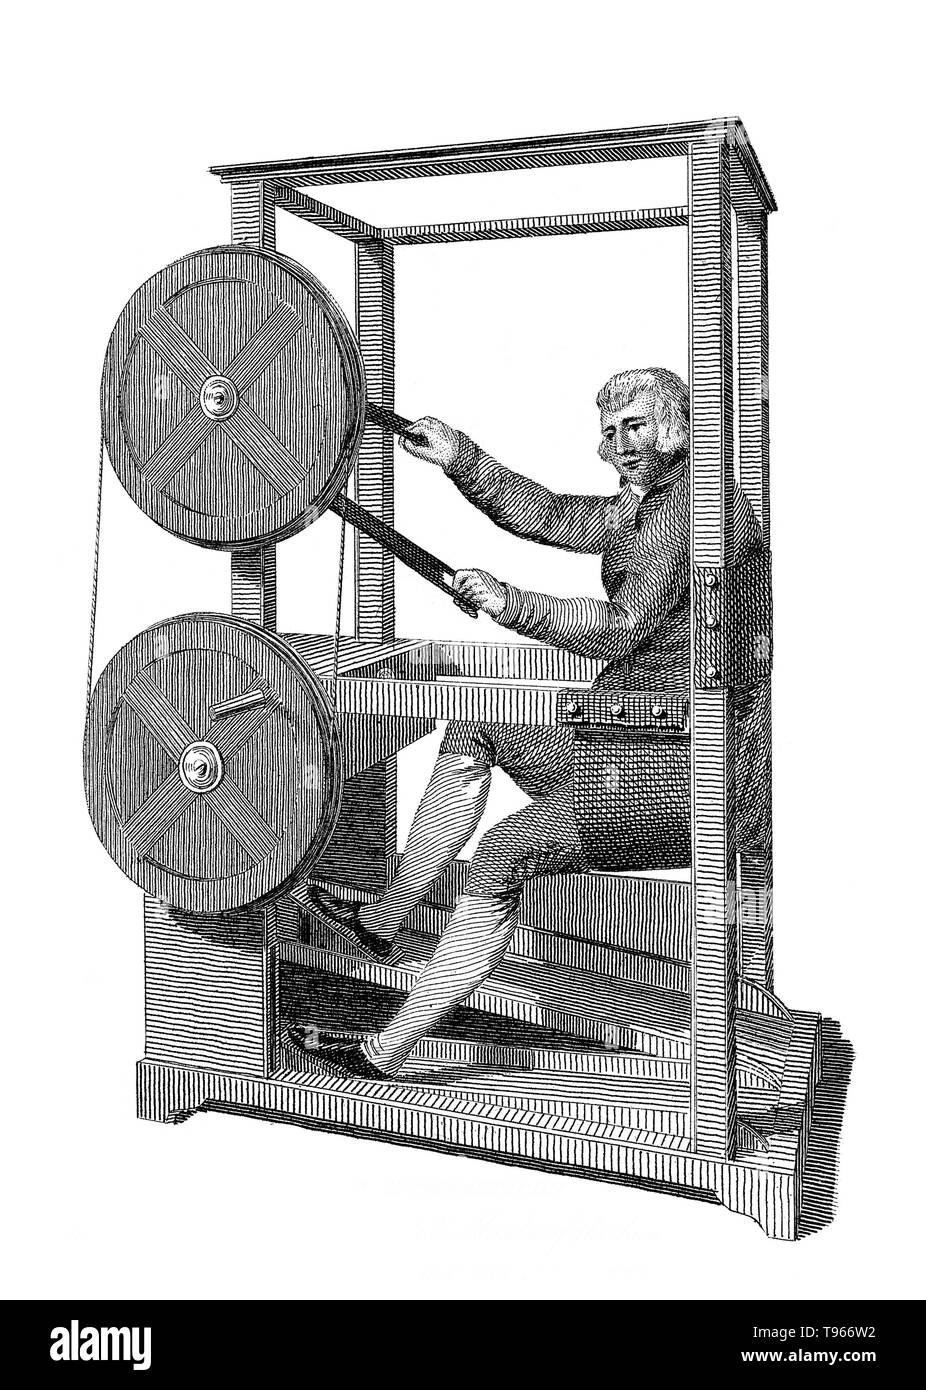 The Gymnasticon was an early exercise machine resembling a stationary bicycle, invented in 1796 by Francis Lowndes. In his patent, Lowndes described the machine as intended simply to give and apply motion and exercise, voluntary or involuntary, to the limbs, joints, and muscles of the human body. The Gymnasticon depended on a set of flywheels that connected the wooden treadles for the feet to cranks for the hands, which could drive each other or operate independently. Stock Photo